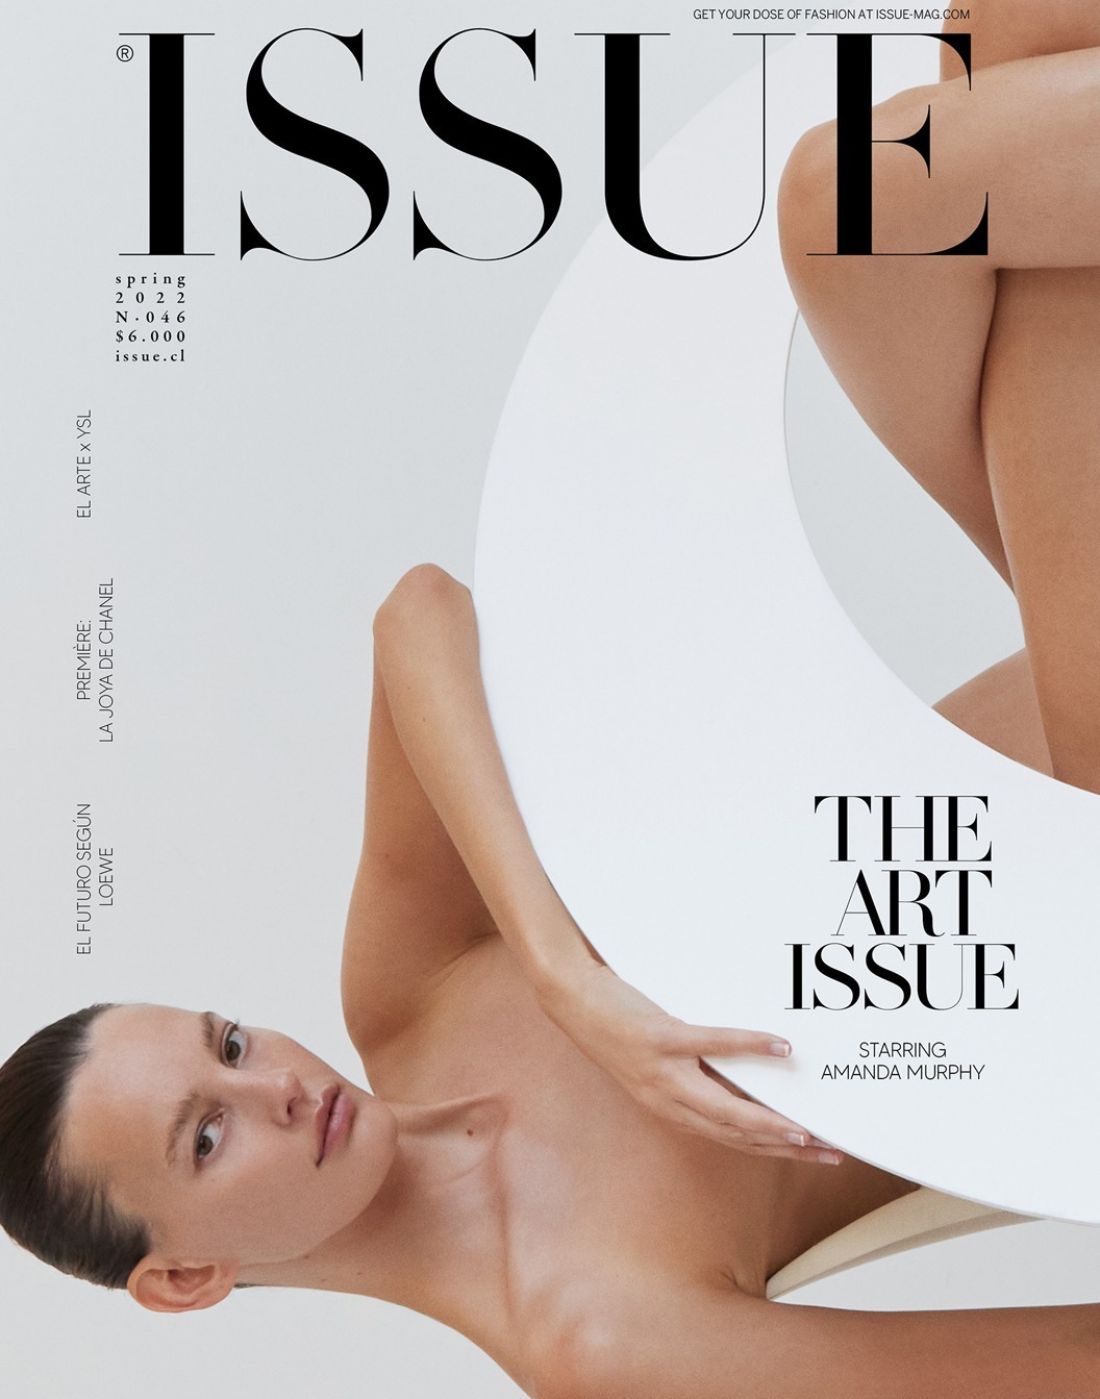 The Art Issue: Amanda Murphy Covers Issue Magazine Spring 2022